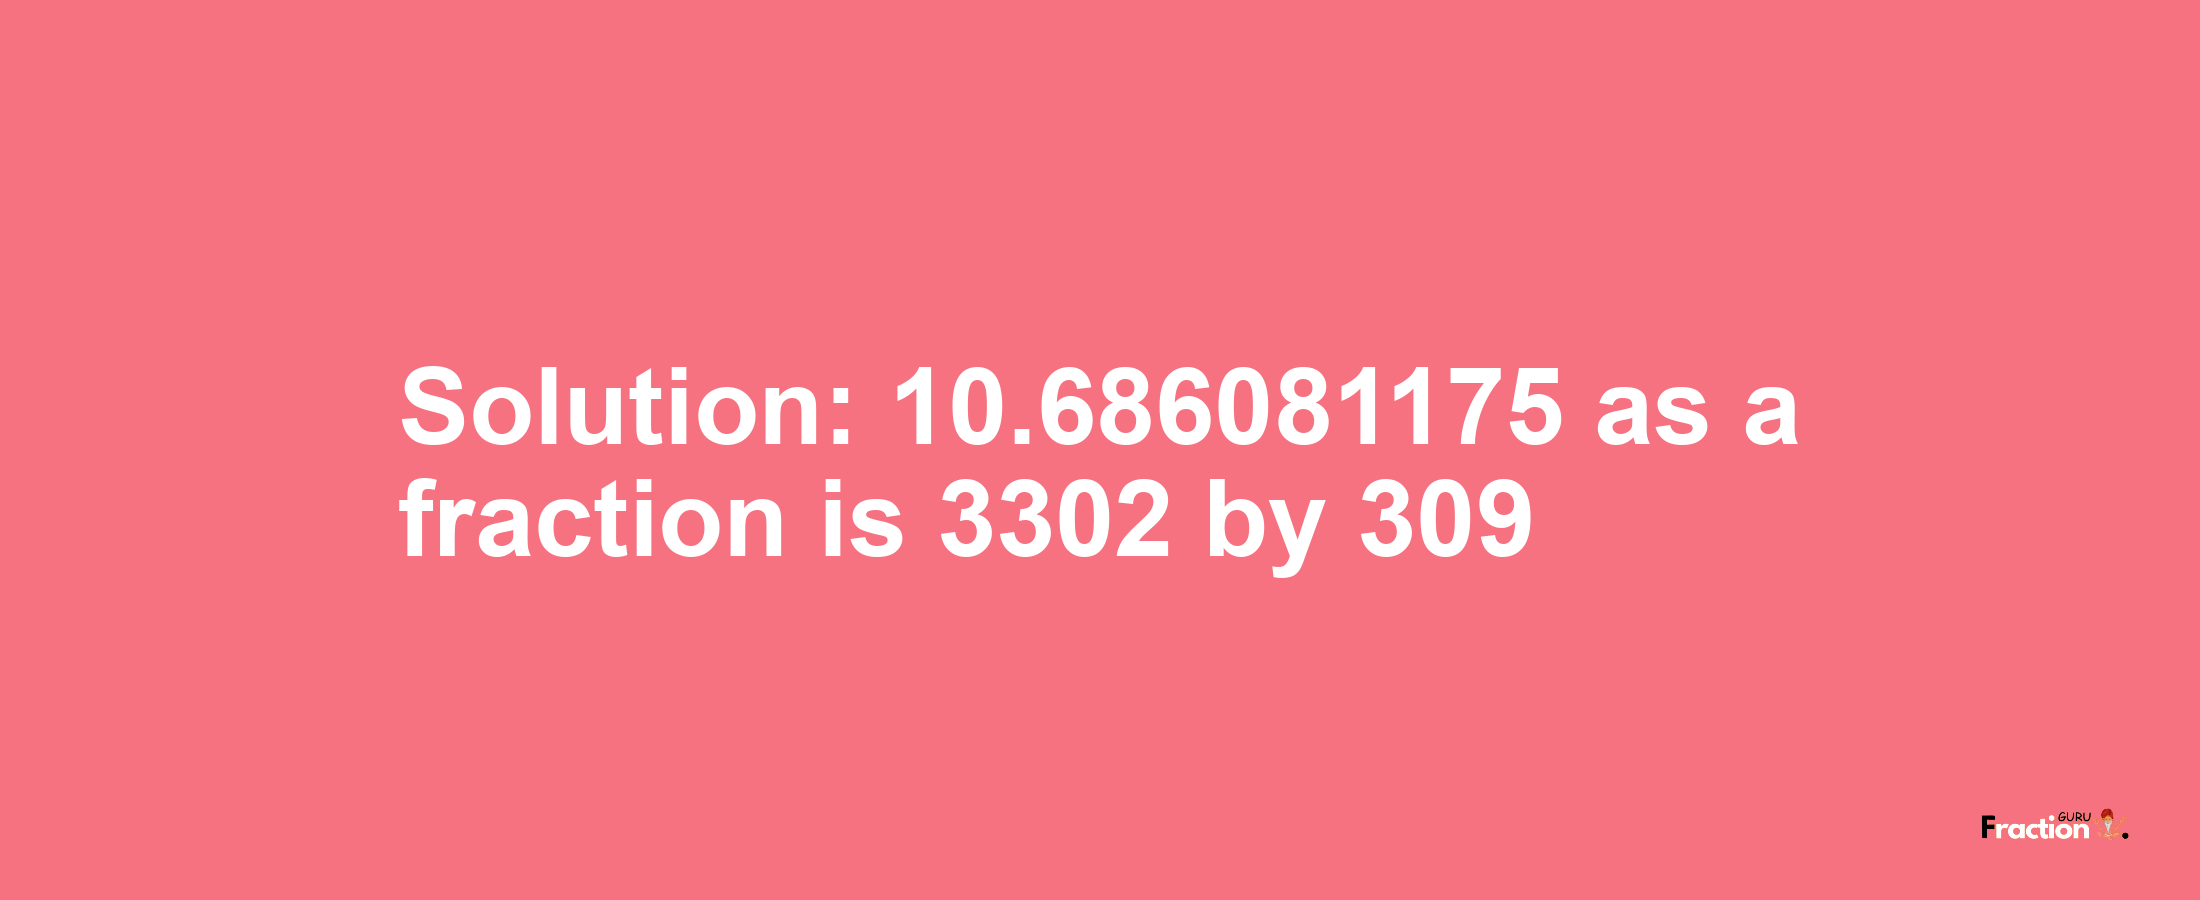 Solution:10.686081175 as a fraction is 3302/309